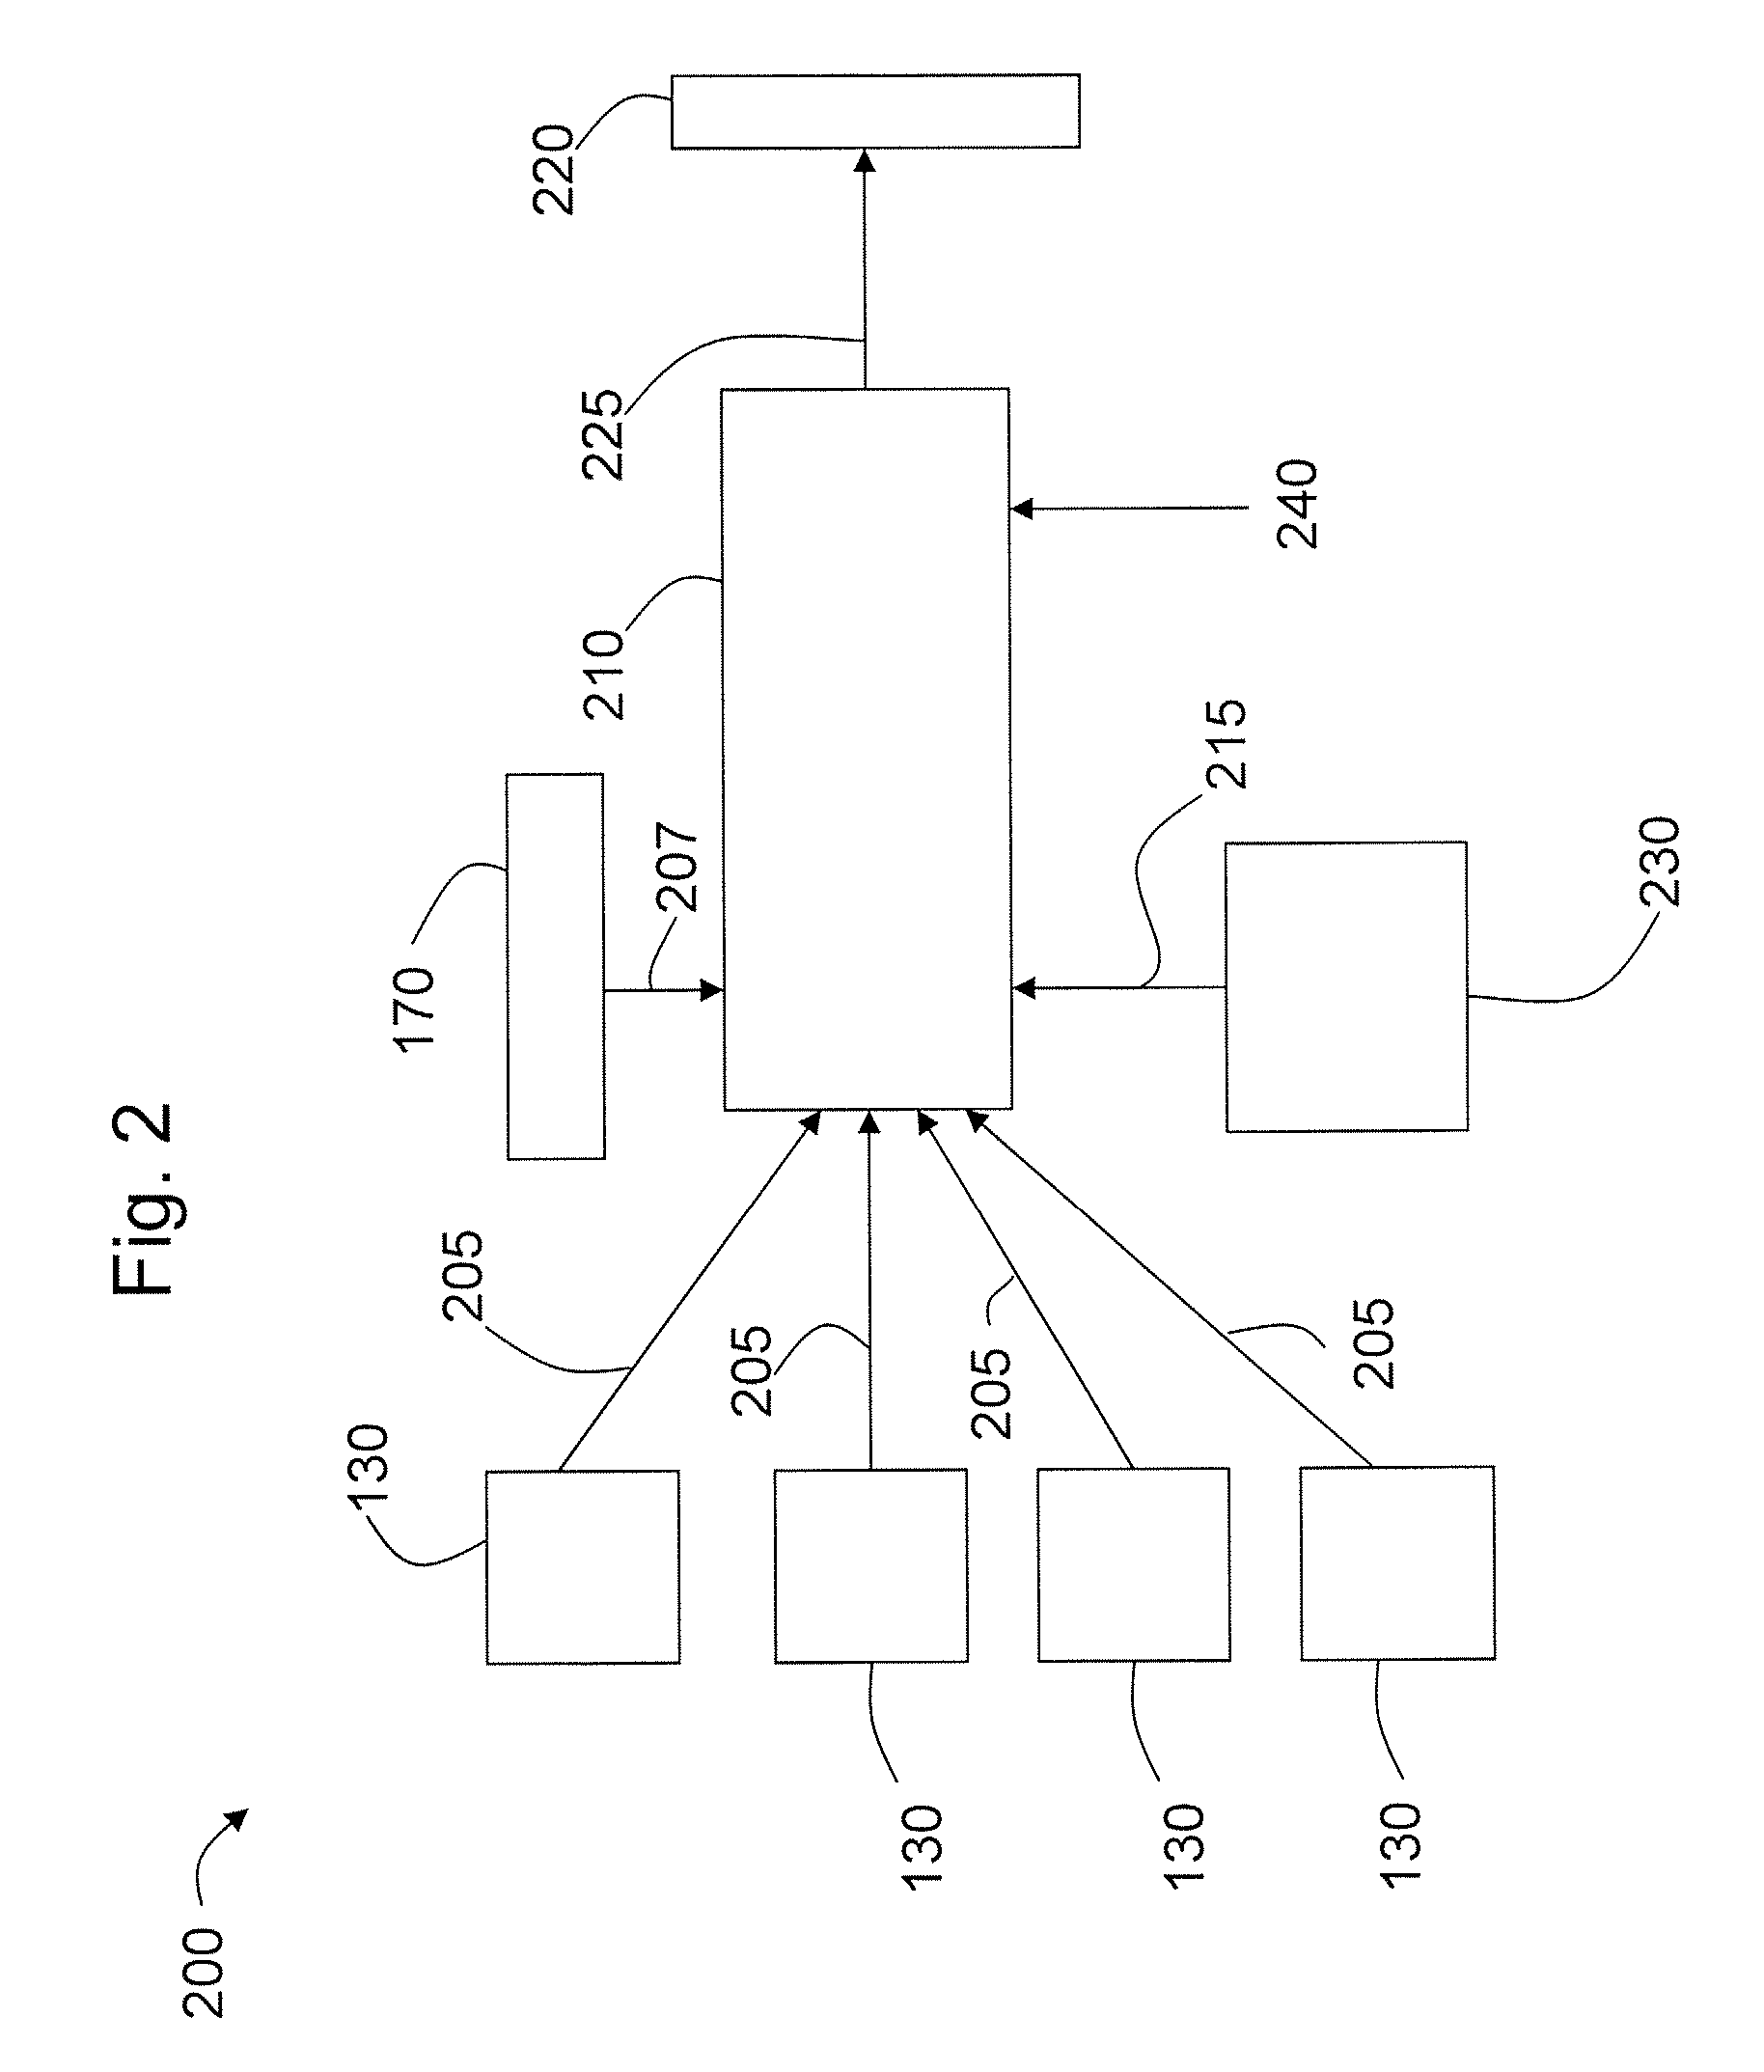 System utilizing radio frequency signals for tracking and improving navigation of slender instruments during insertion in the body